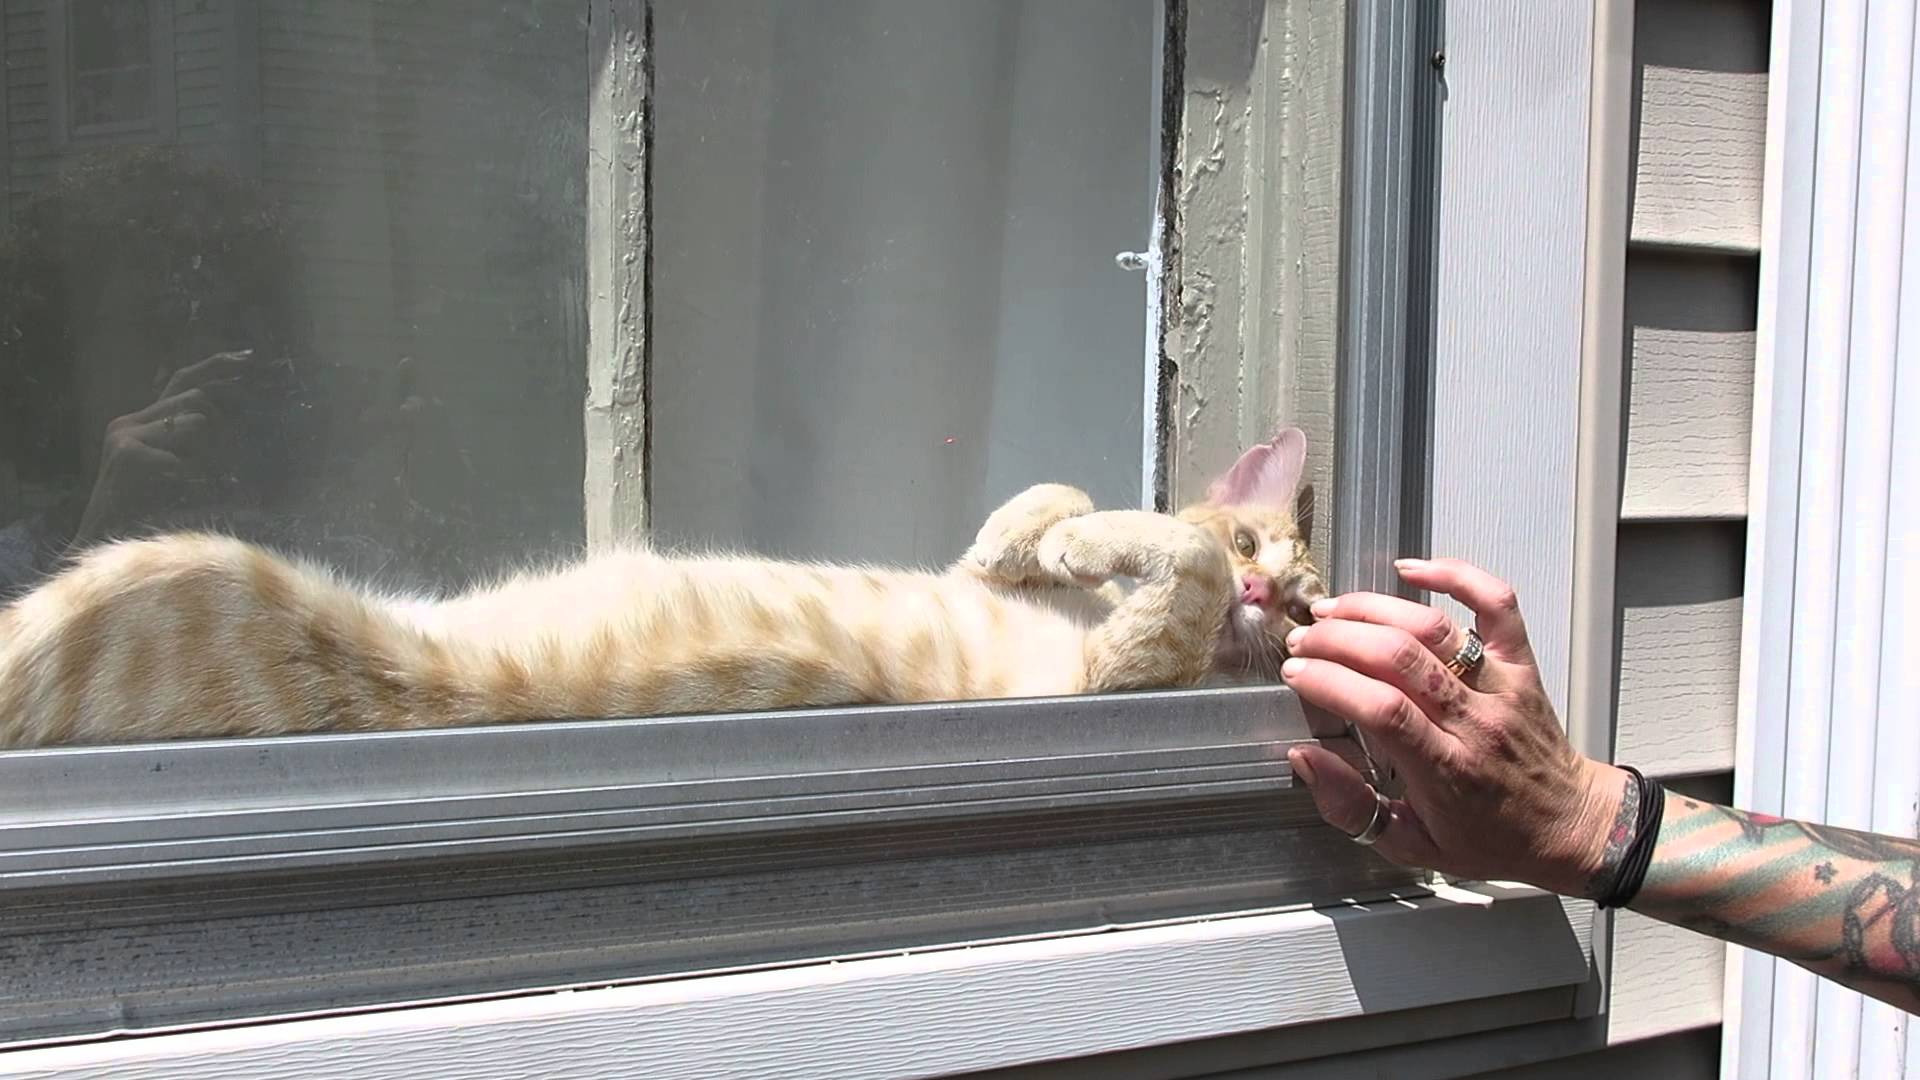 How much is that Cat in the window? - YouTube